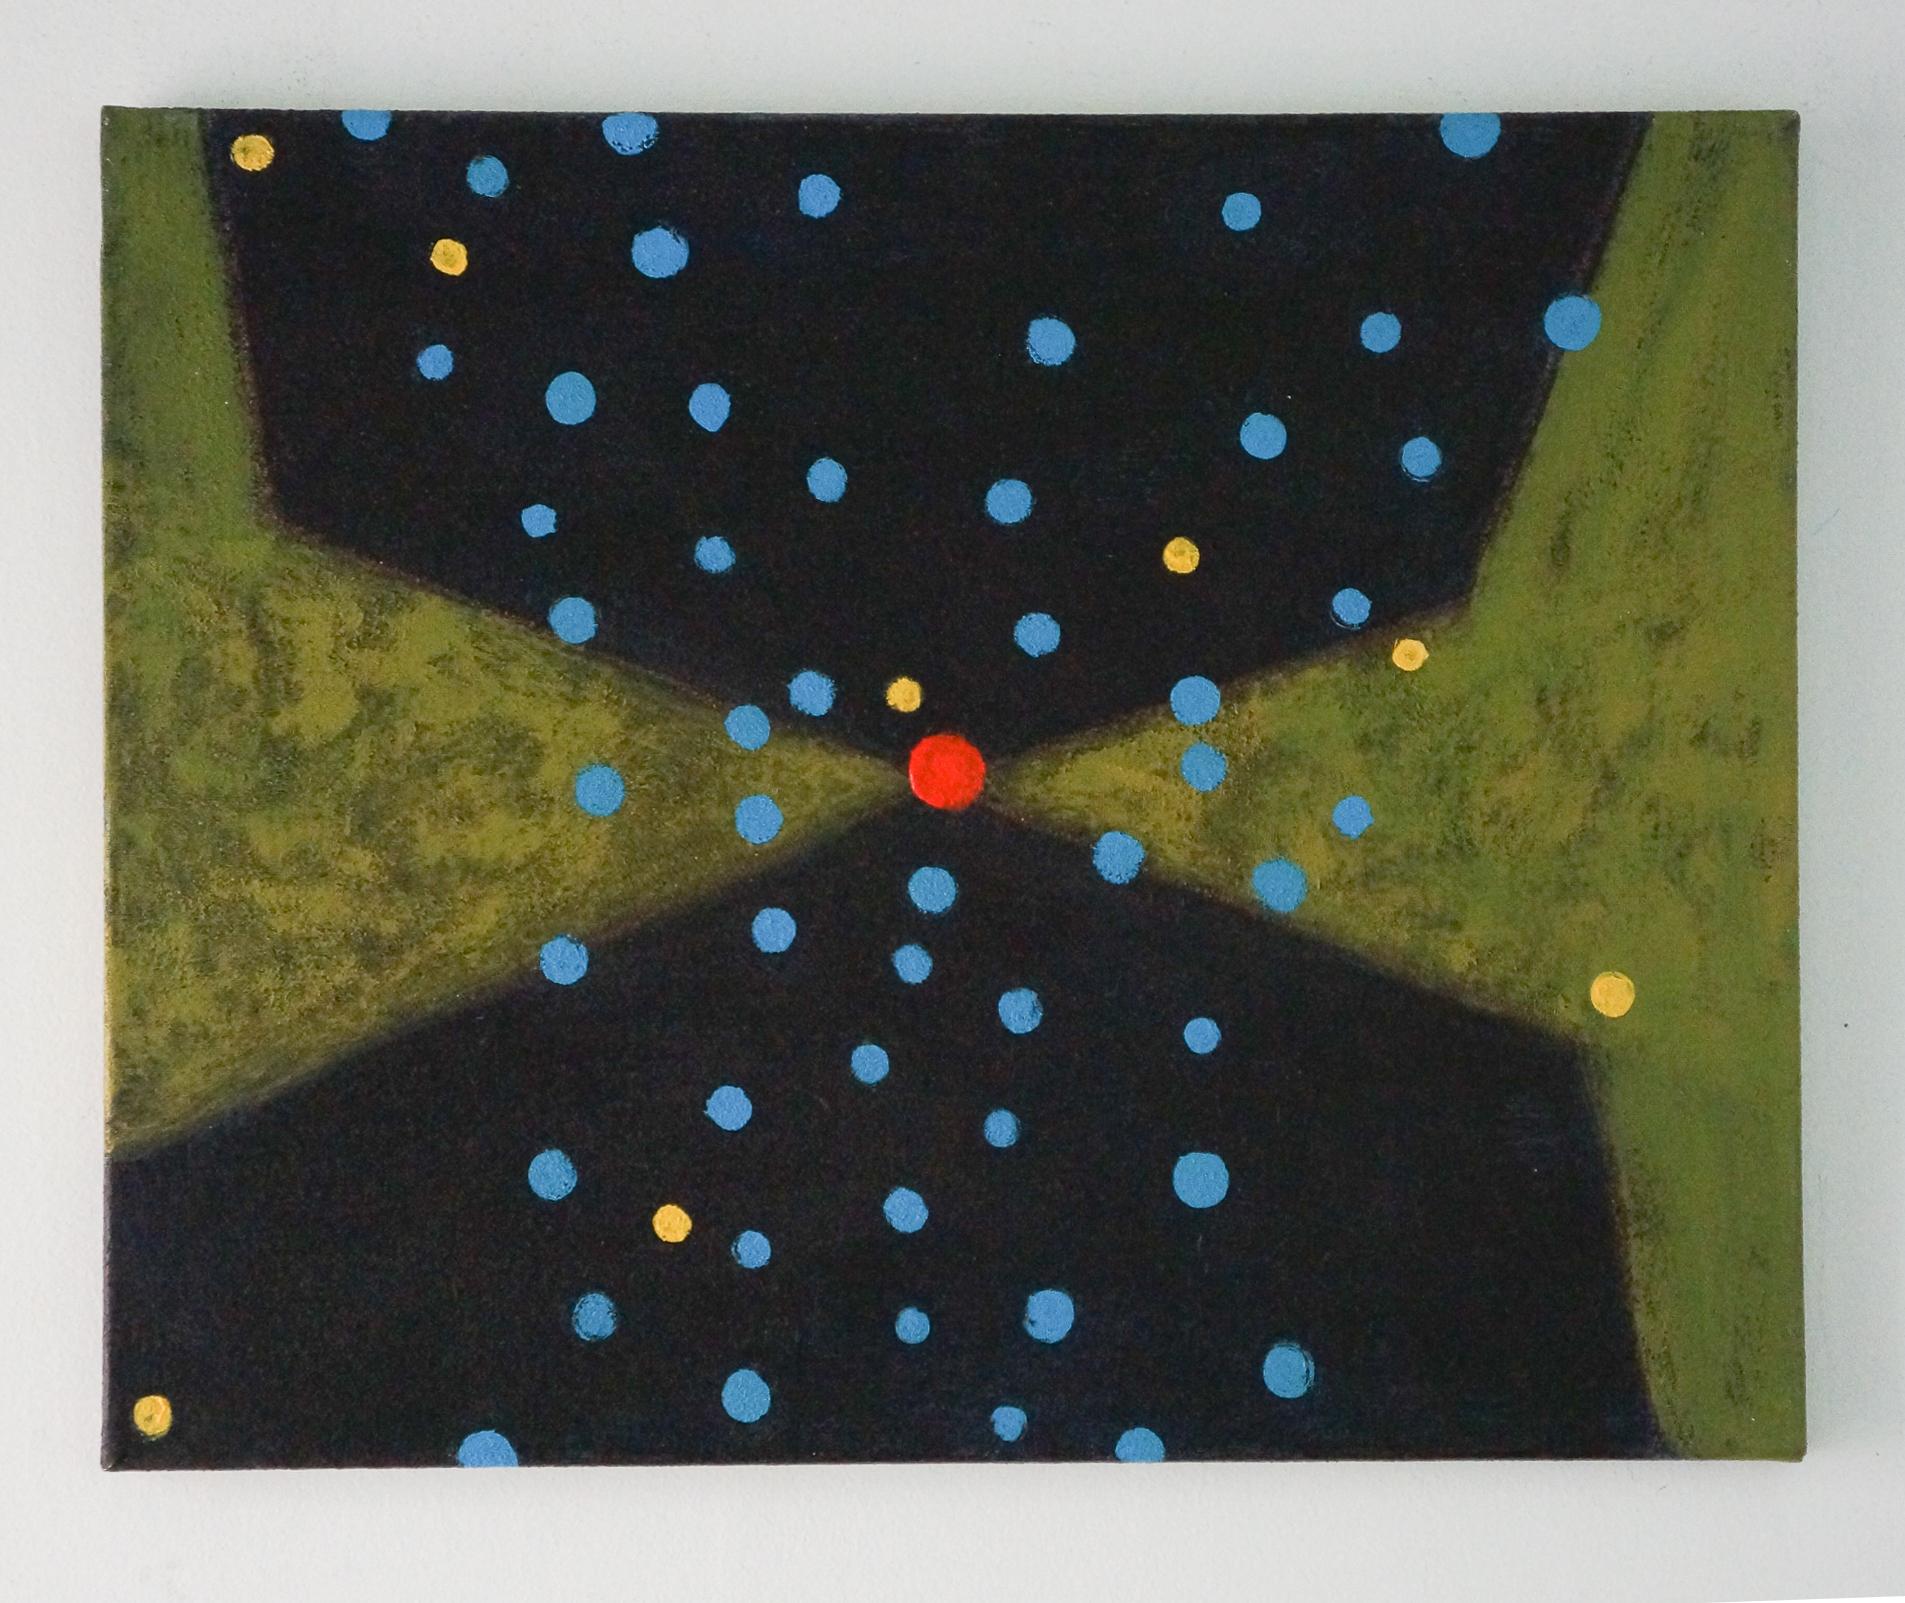 <p>Artist Comments<br>Artist Linda Cassidy employs organically organized geometric forms in an alluring abstract. She builds a piece that seems to conduct a quietly inviting dance. Blue and yellow dots scatter the canvas encompassing the central red